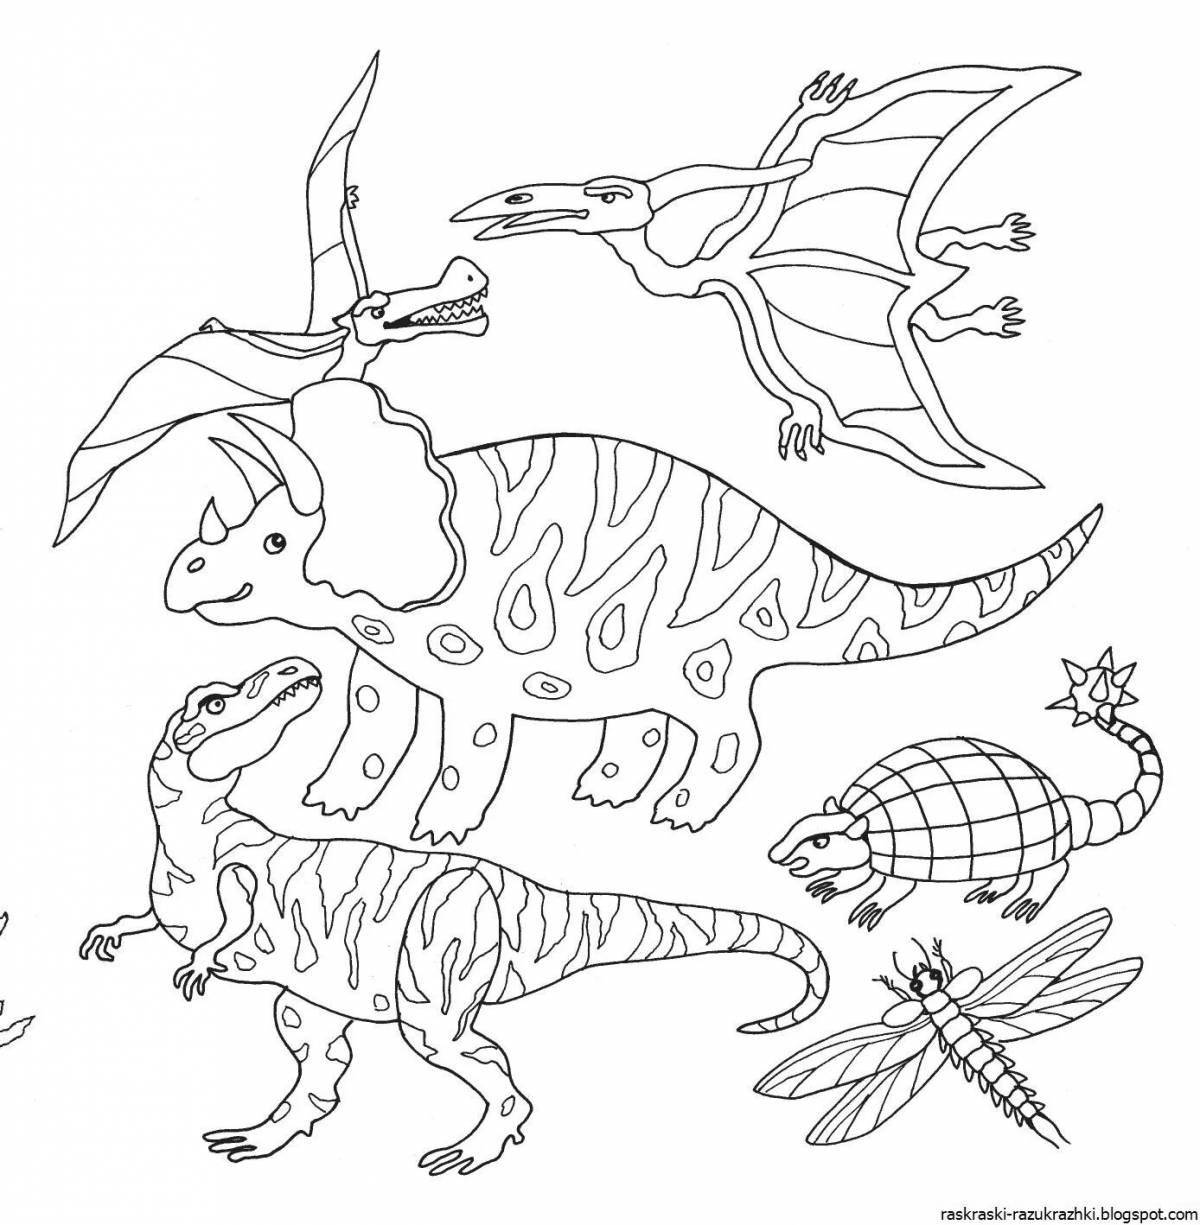 Dinosaur fun coloring book for 5-8 year olds